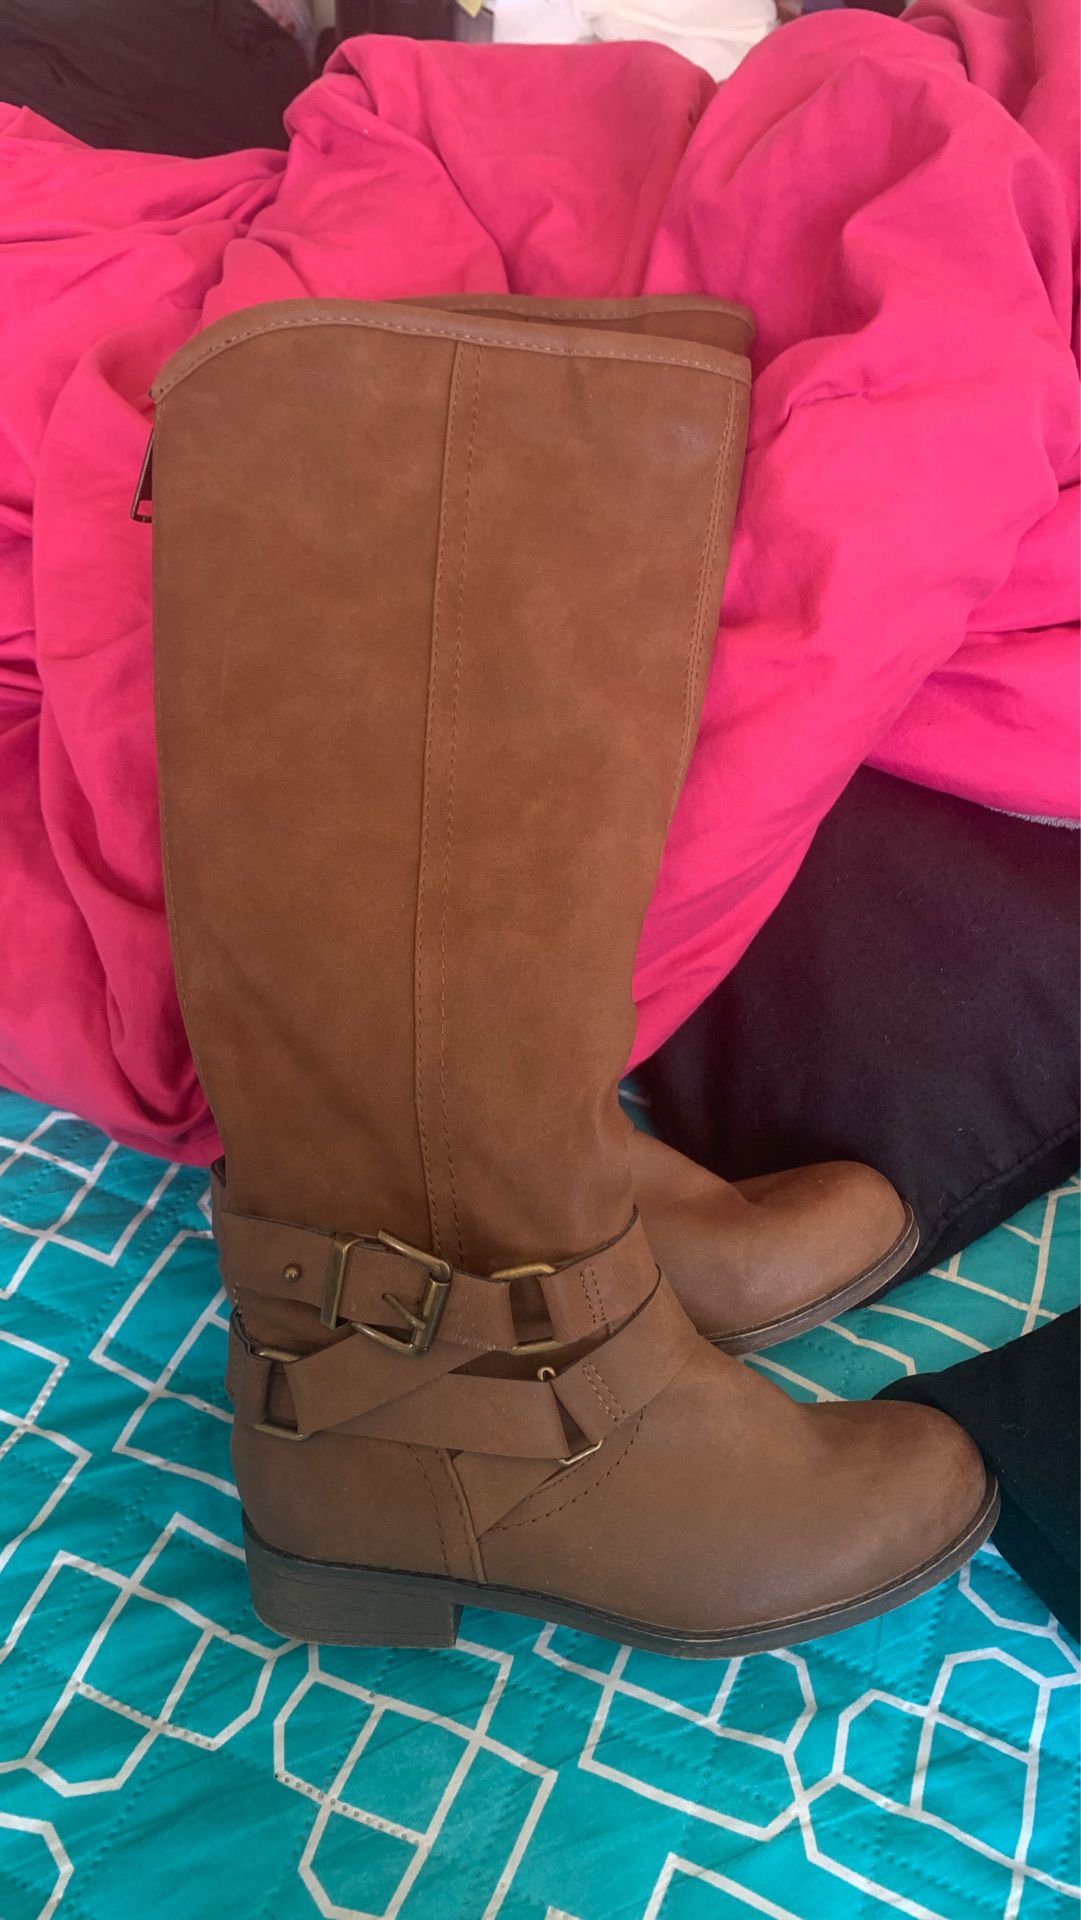 brand new womens boots in size 5 1/2